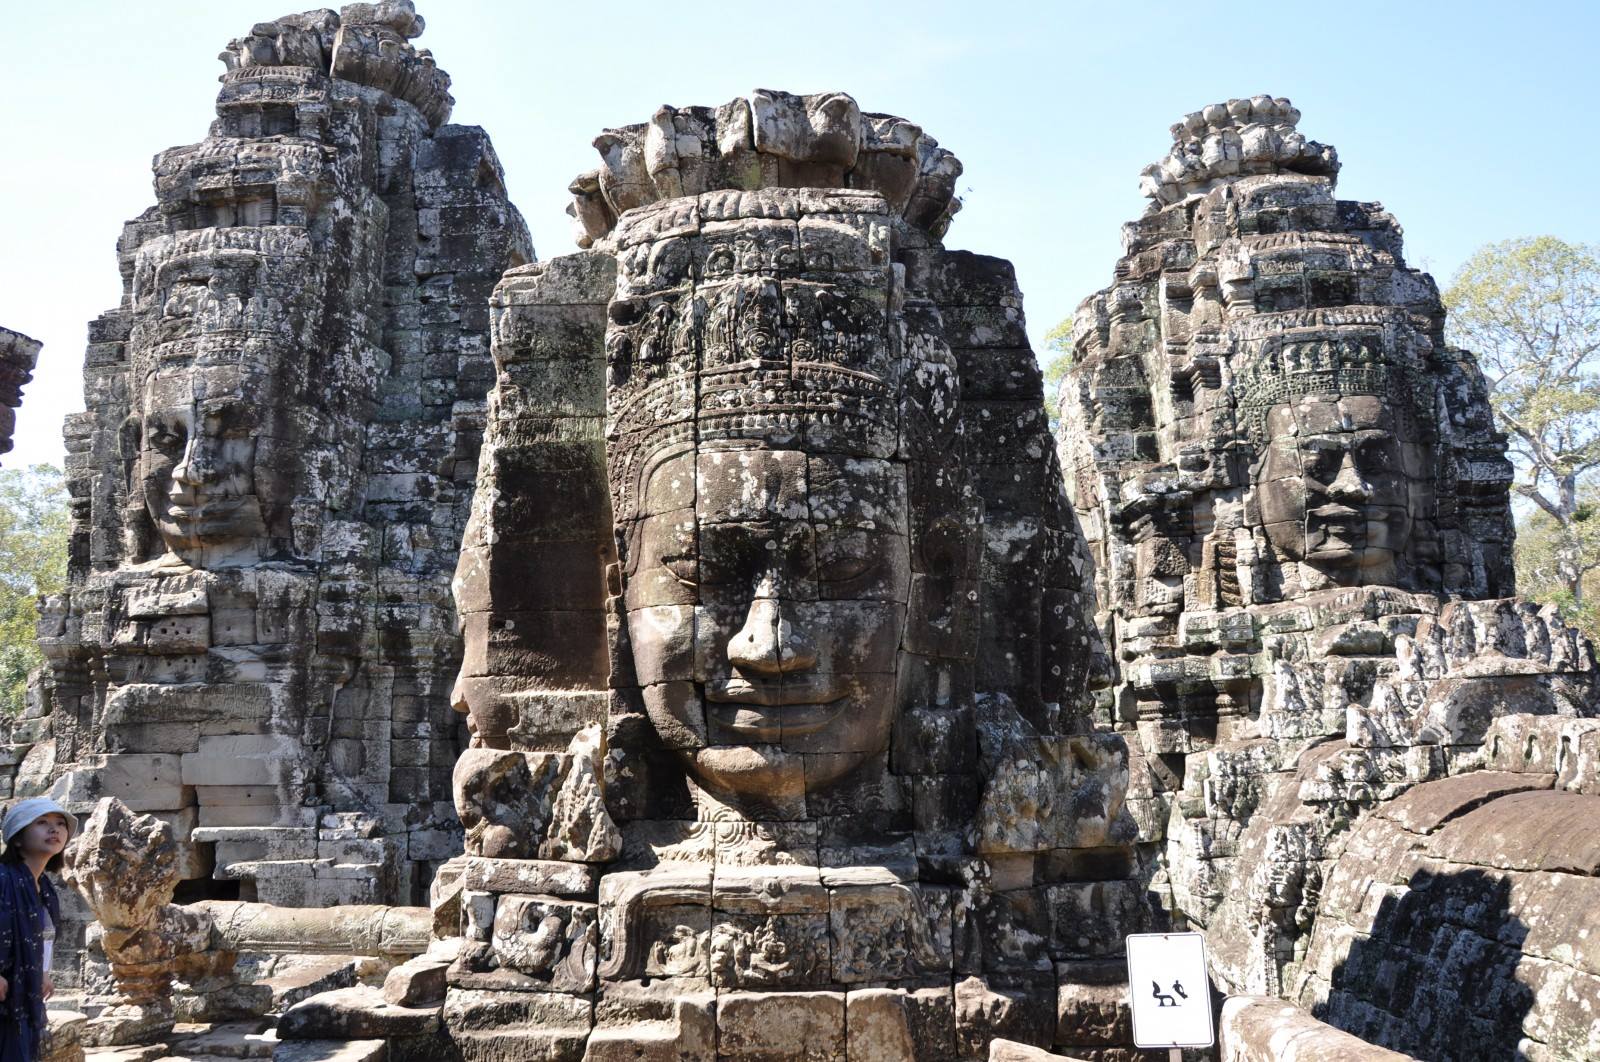 Smiling faces of Buddha statues in Bayon temple makes visitors emotional